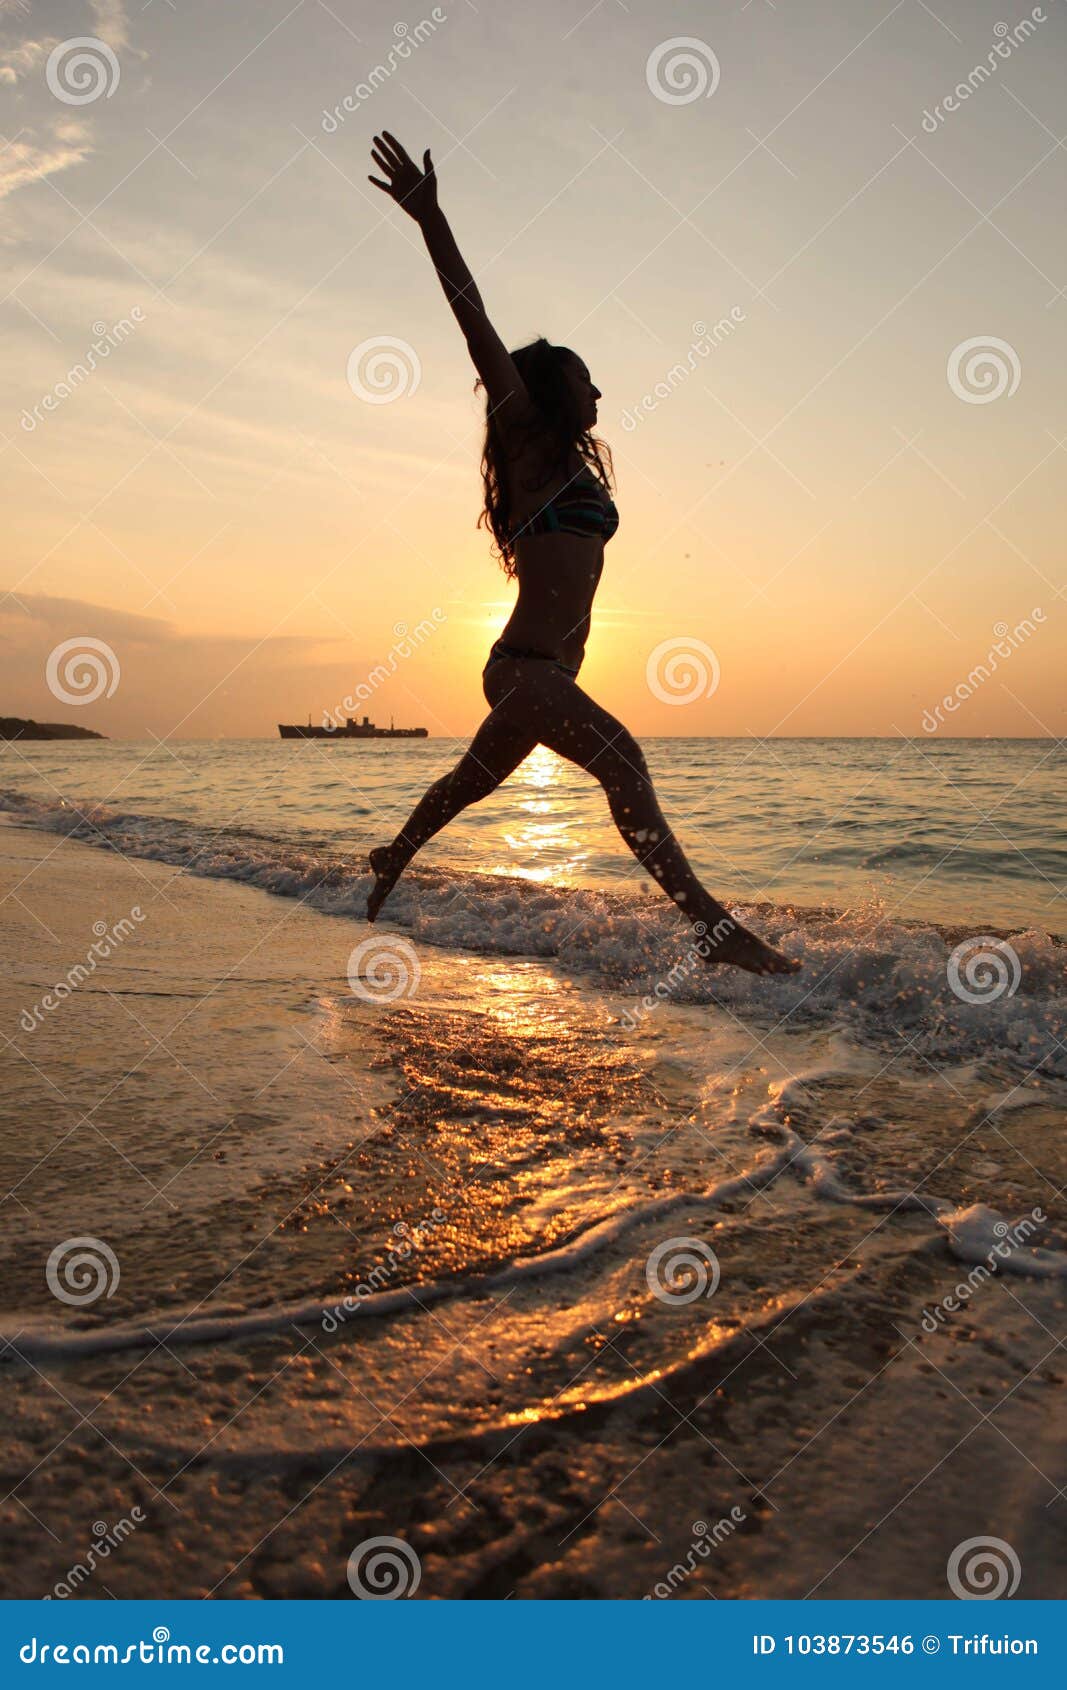 Girl DANCING in SUNSET on SEA Editorial Photo - Image of activities ...